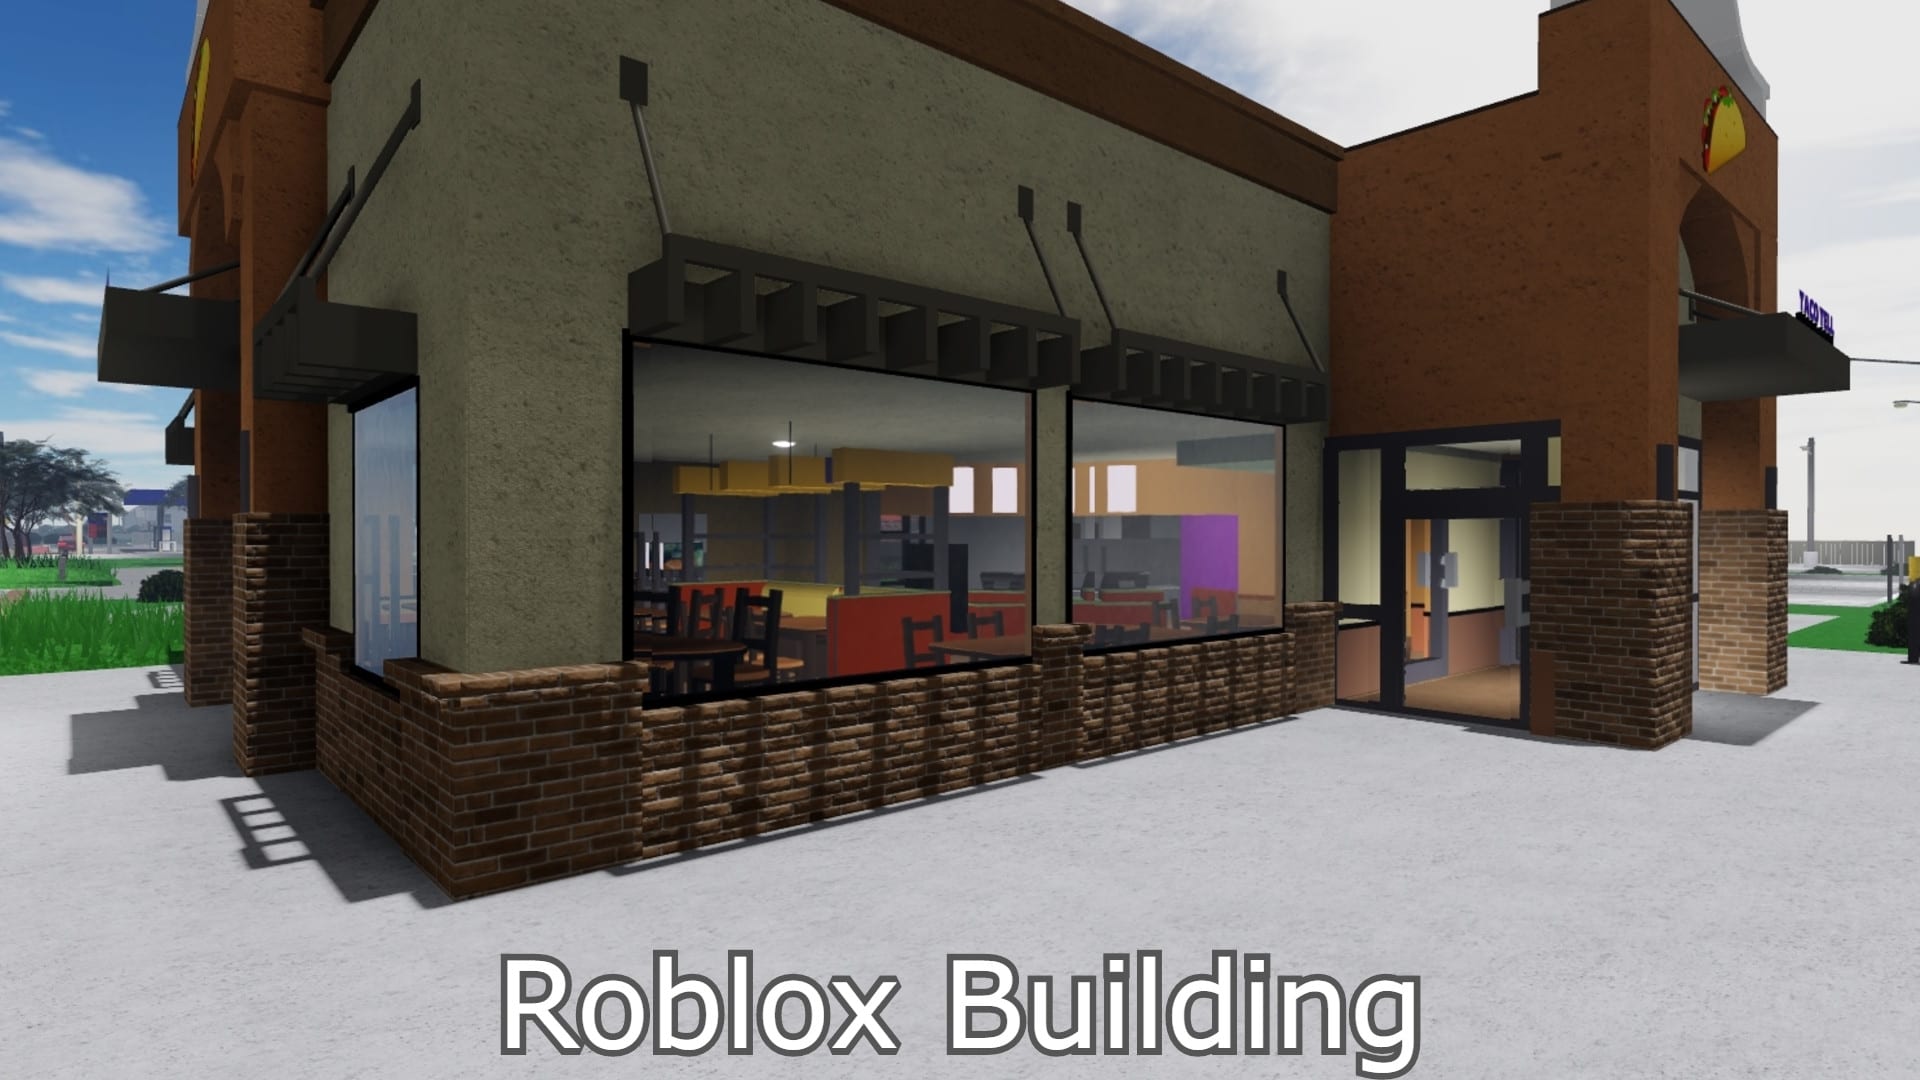 Build You A Building In Roblox Studio By Joeykm16dev Fiverr - roblox studio building system